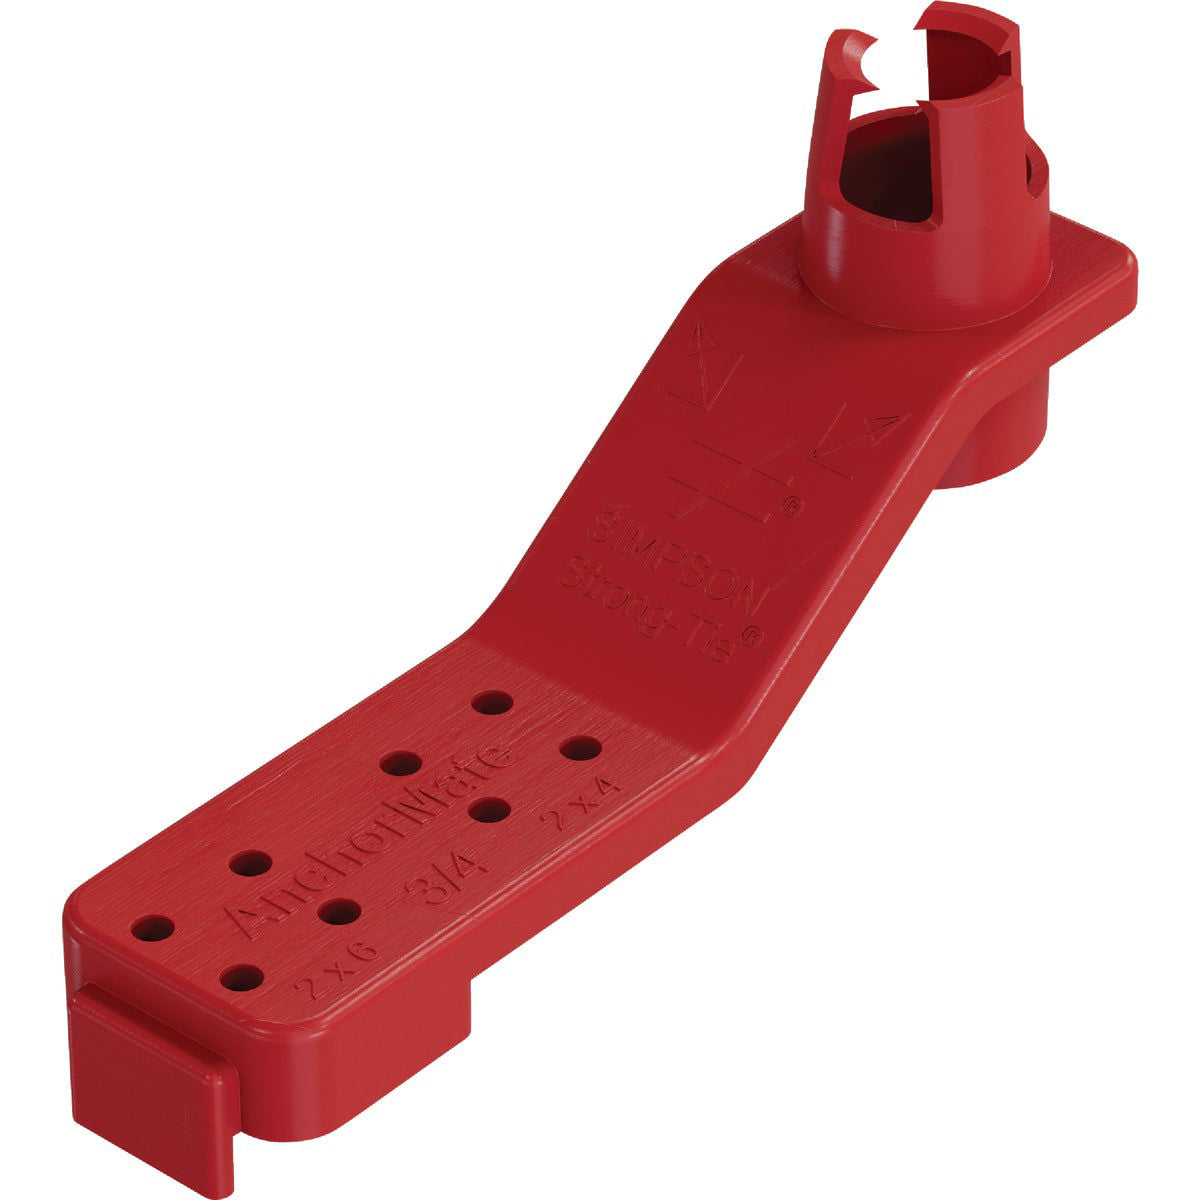 Simpson Strong Tie AM 3/4 AnchorMate Bolt Holder 3/4"- Nylon, Red